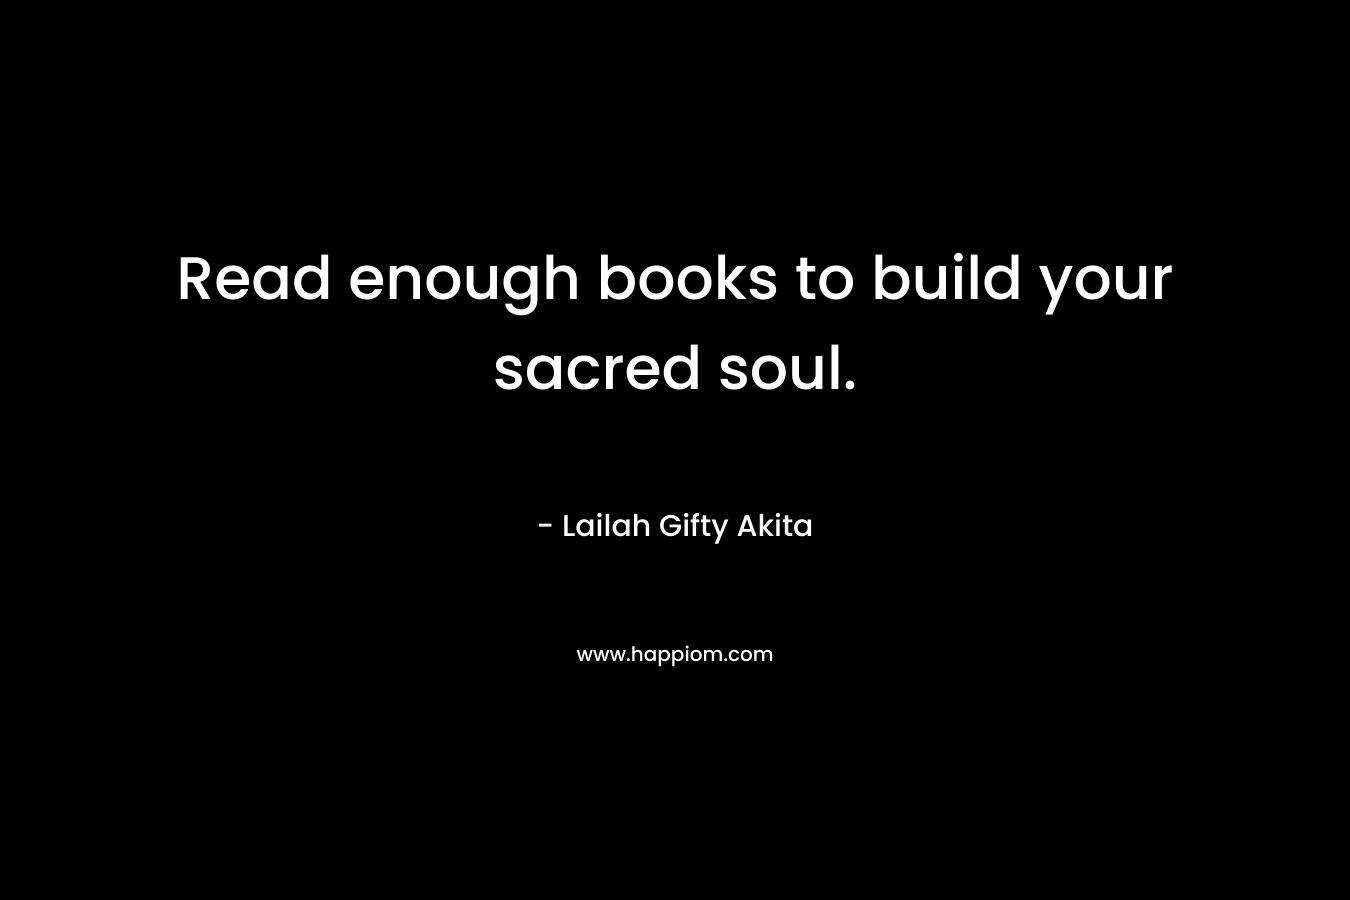 Read enough books to build your sacred soul.